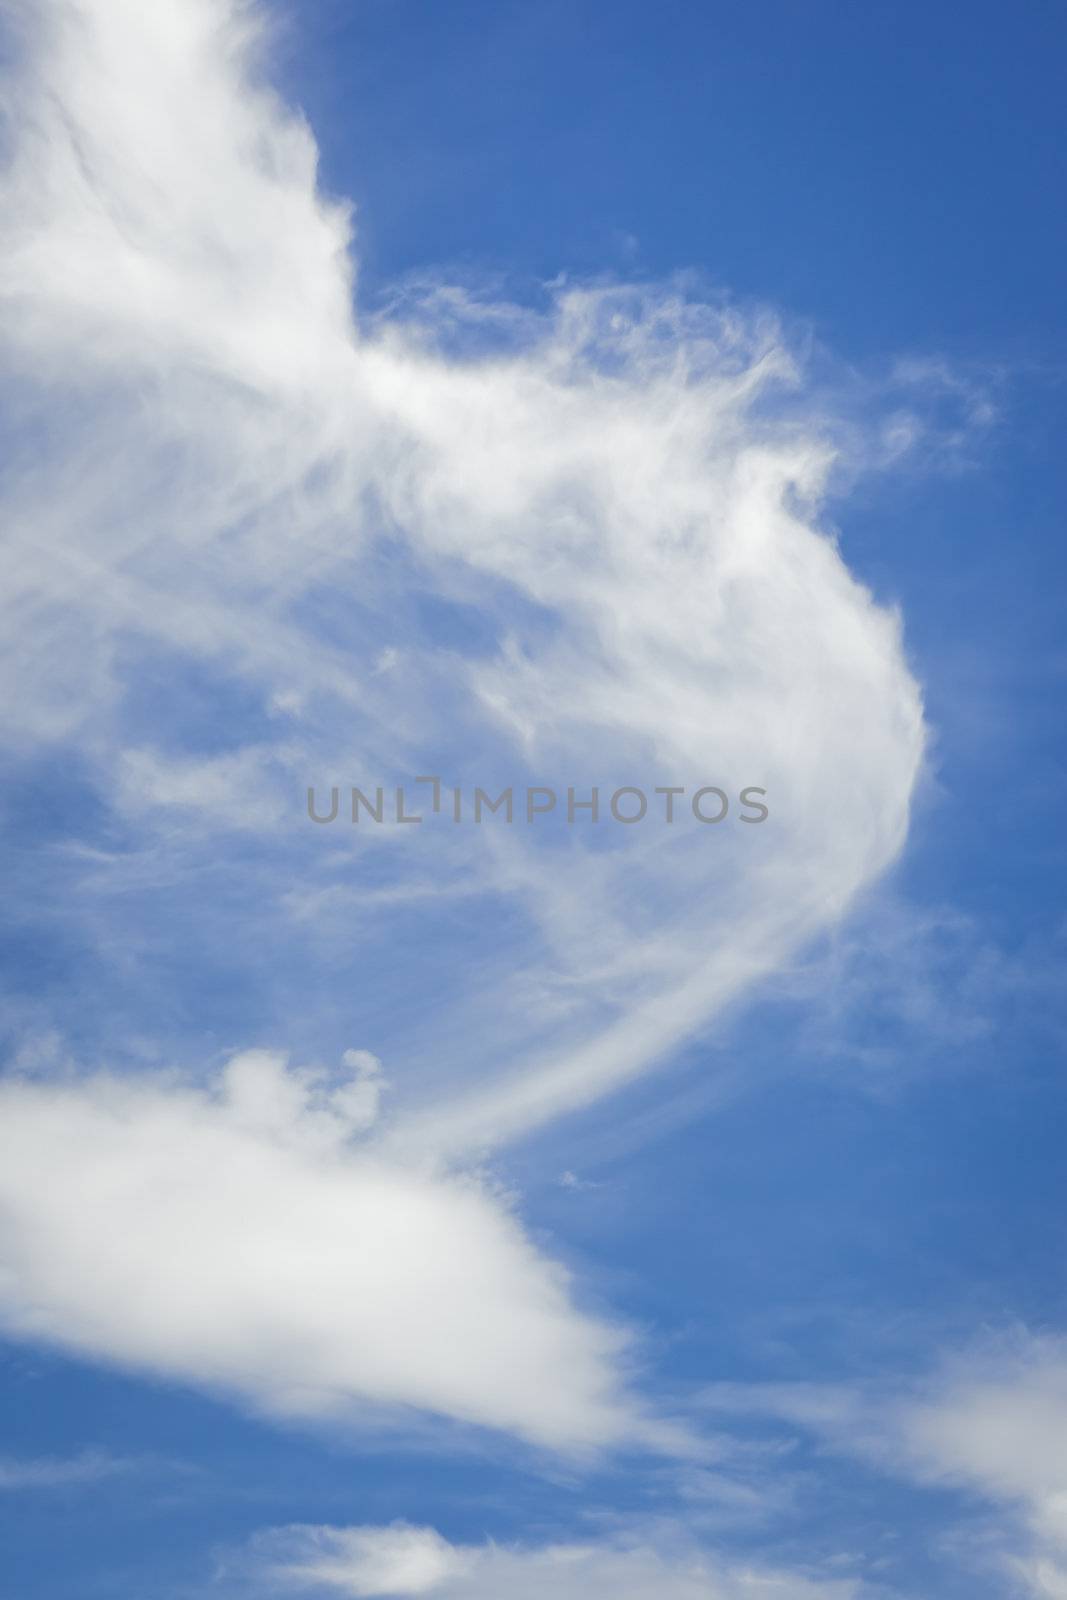 An image of a special cloud in the blue sky